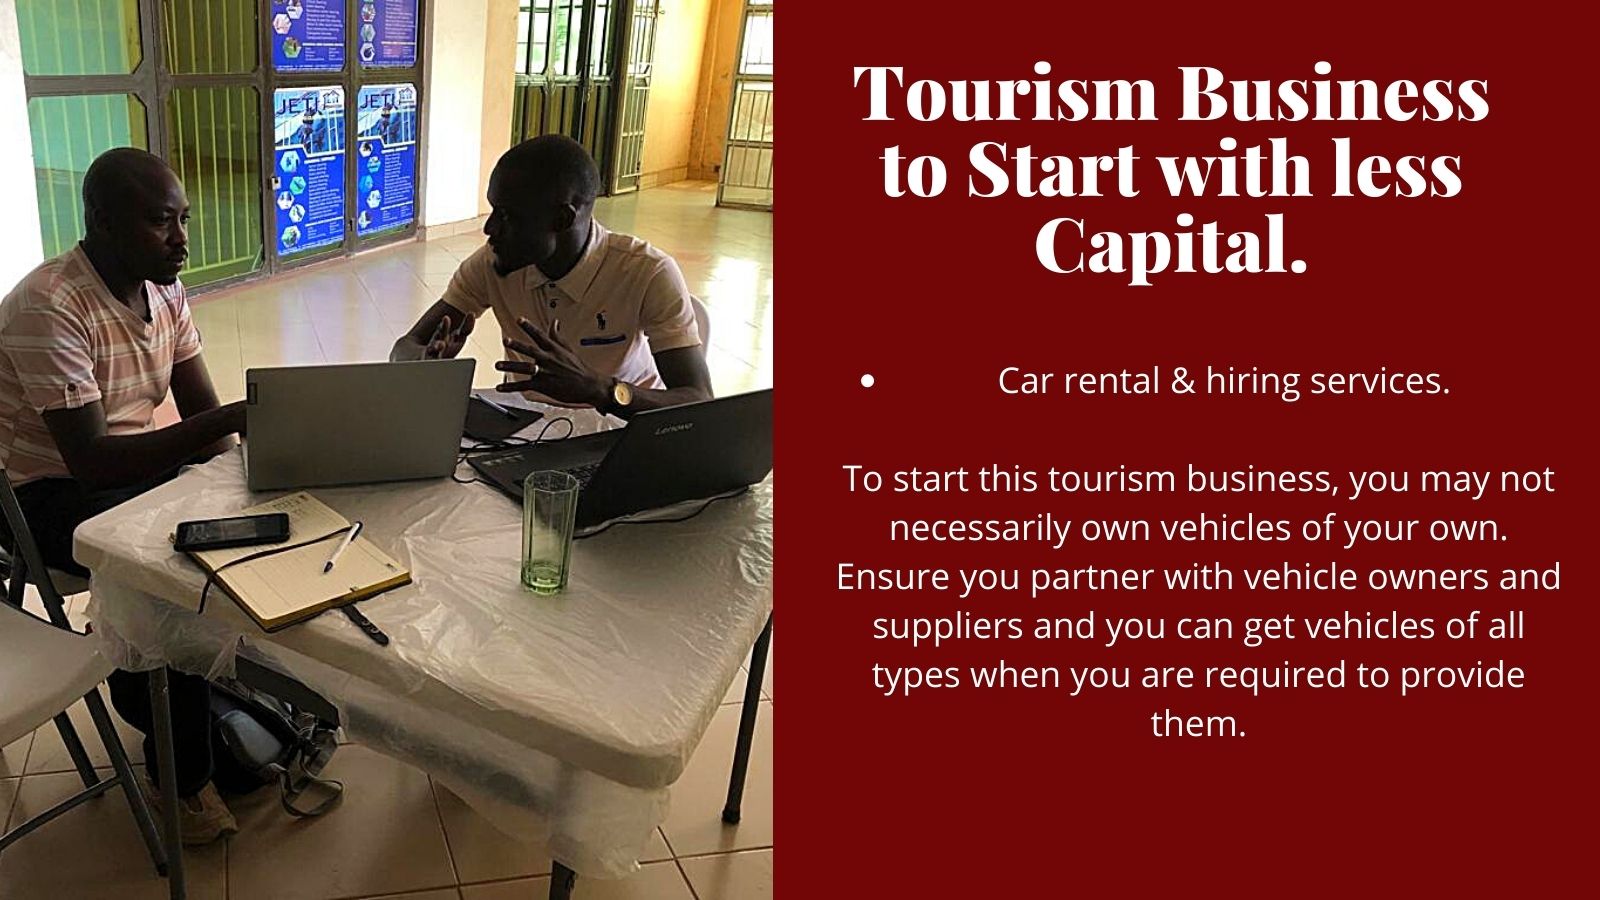 Type Of Tourism Businesses To Start